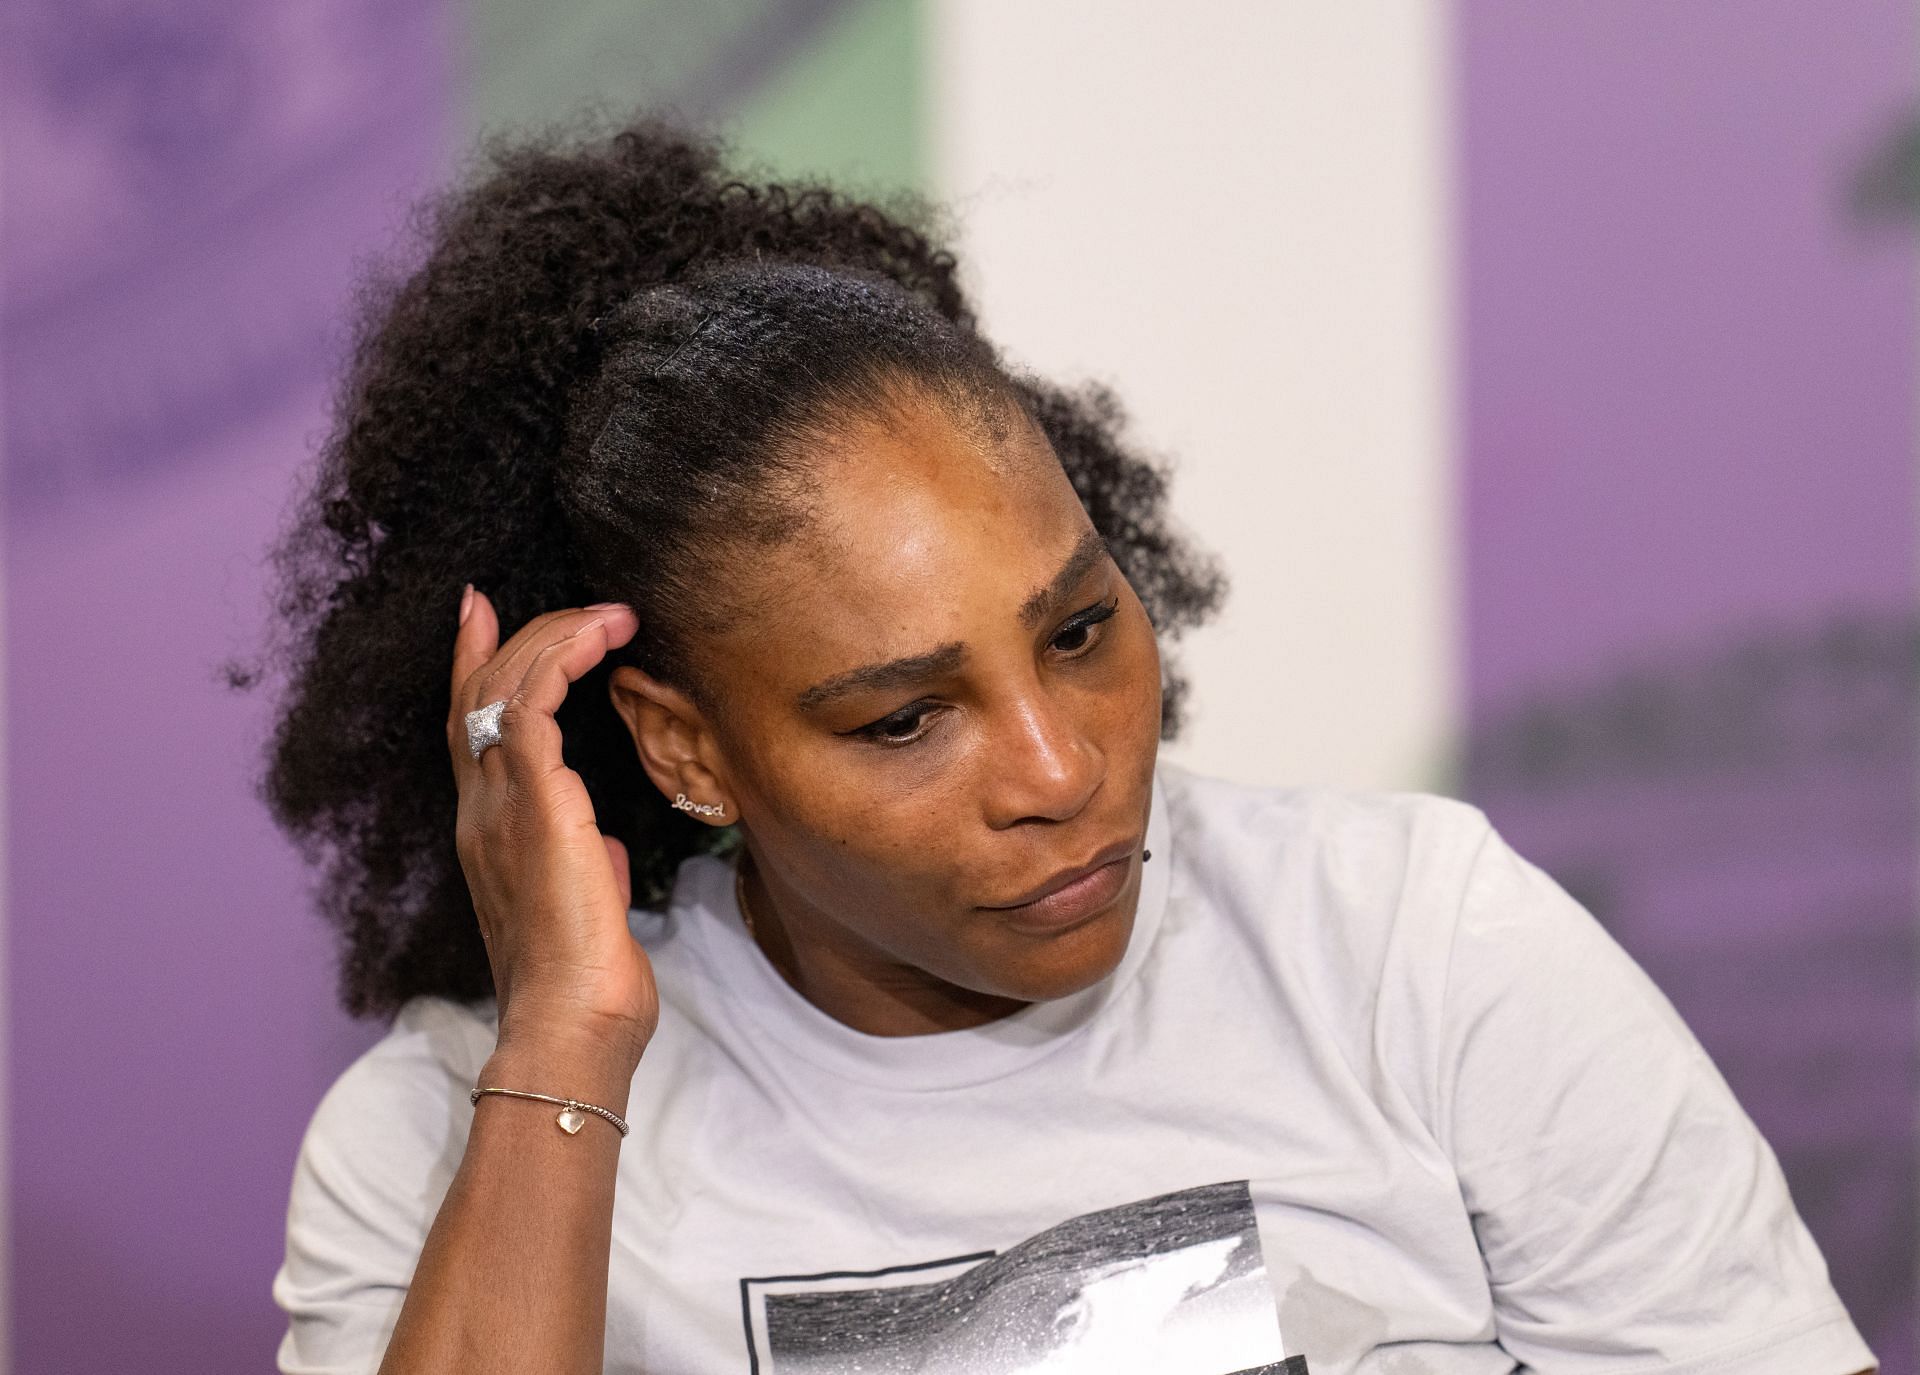 Serena Williams after her first-round loss at Wimbledon